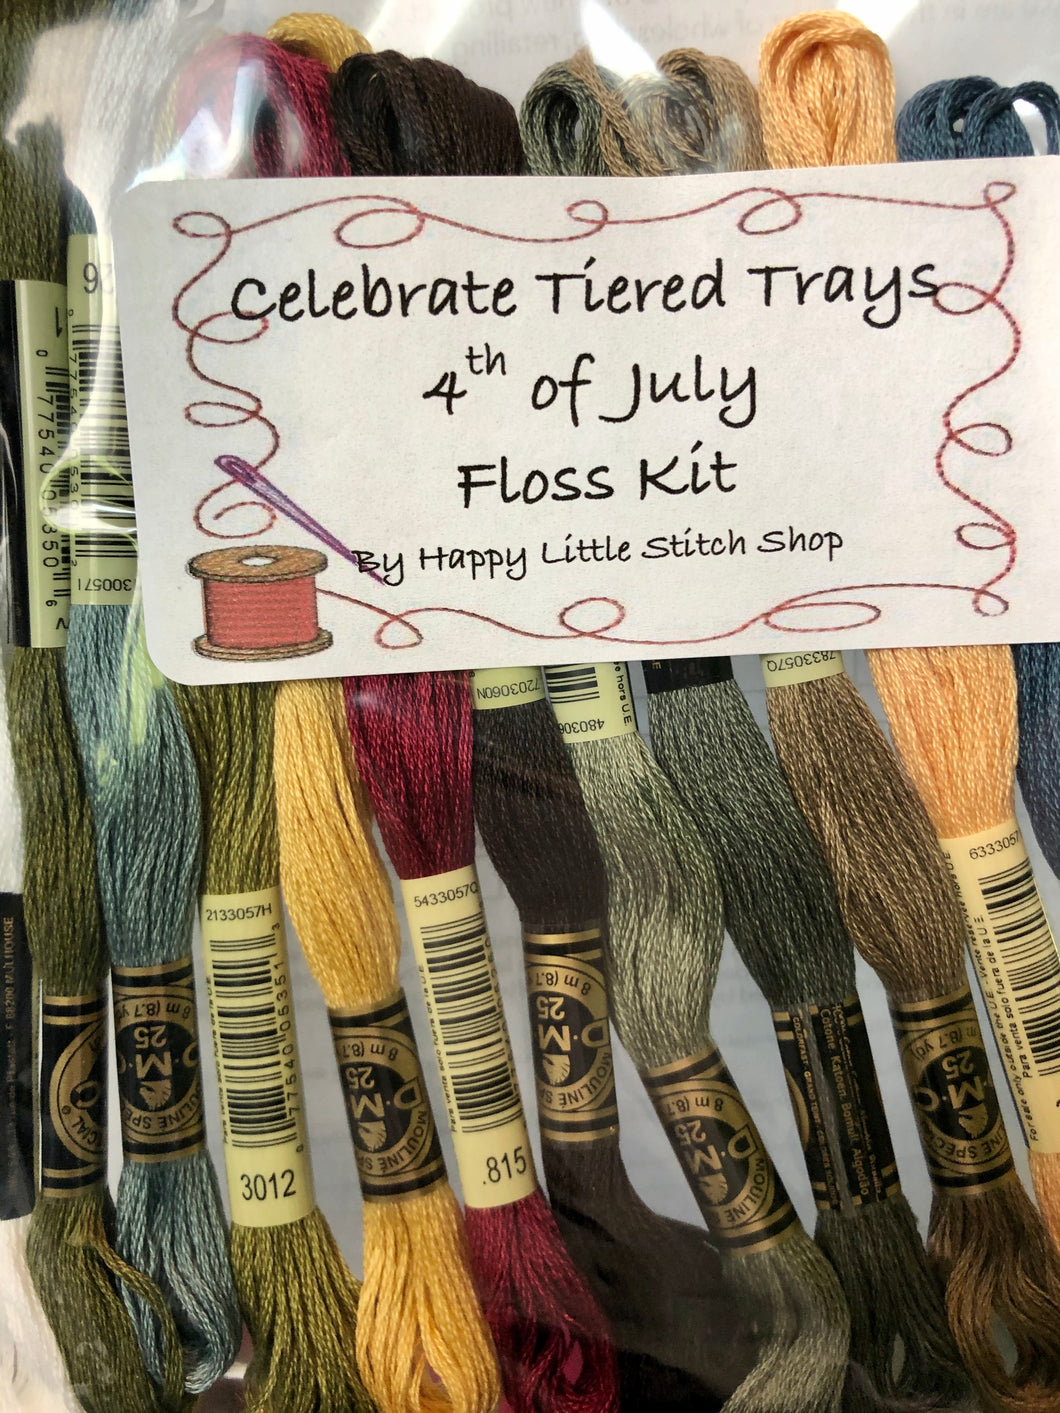 Floss Kit - Celebrate Tiered Trays 4th of July by Madame Chantilly